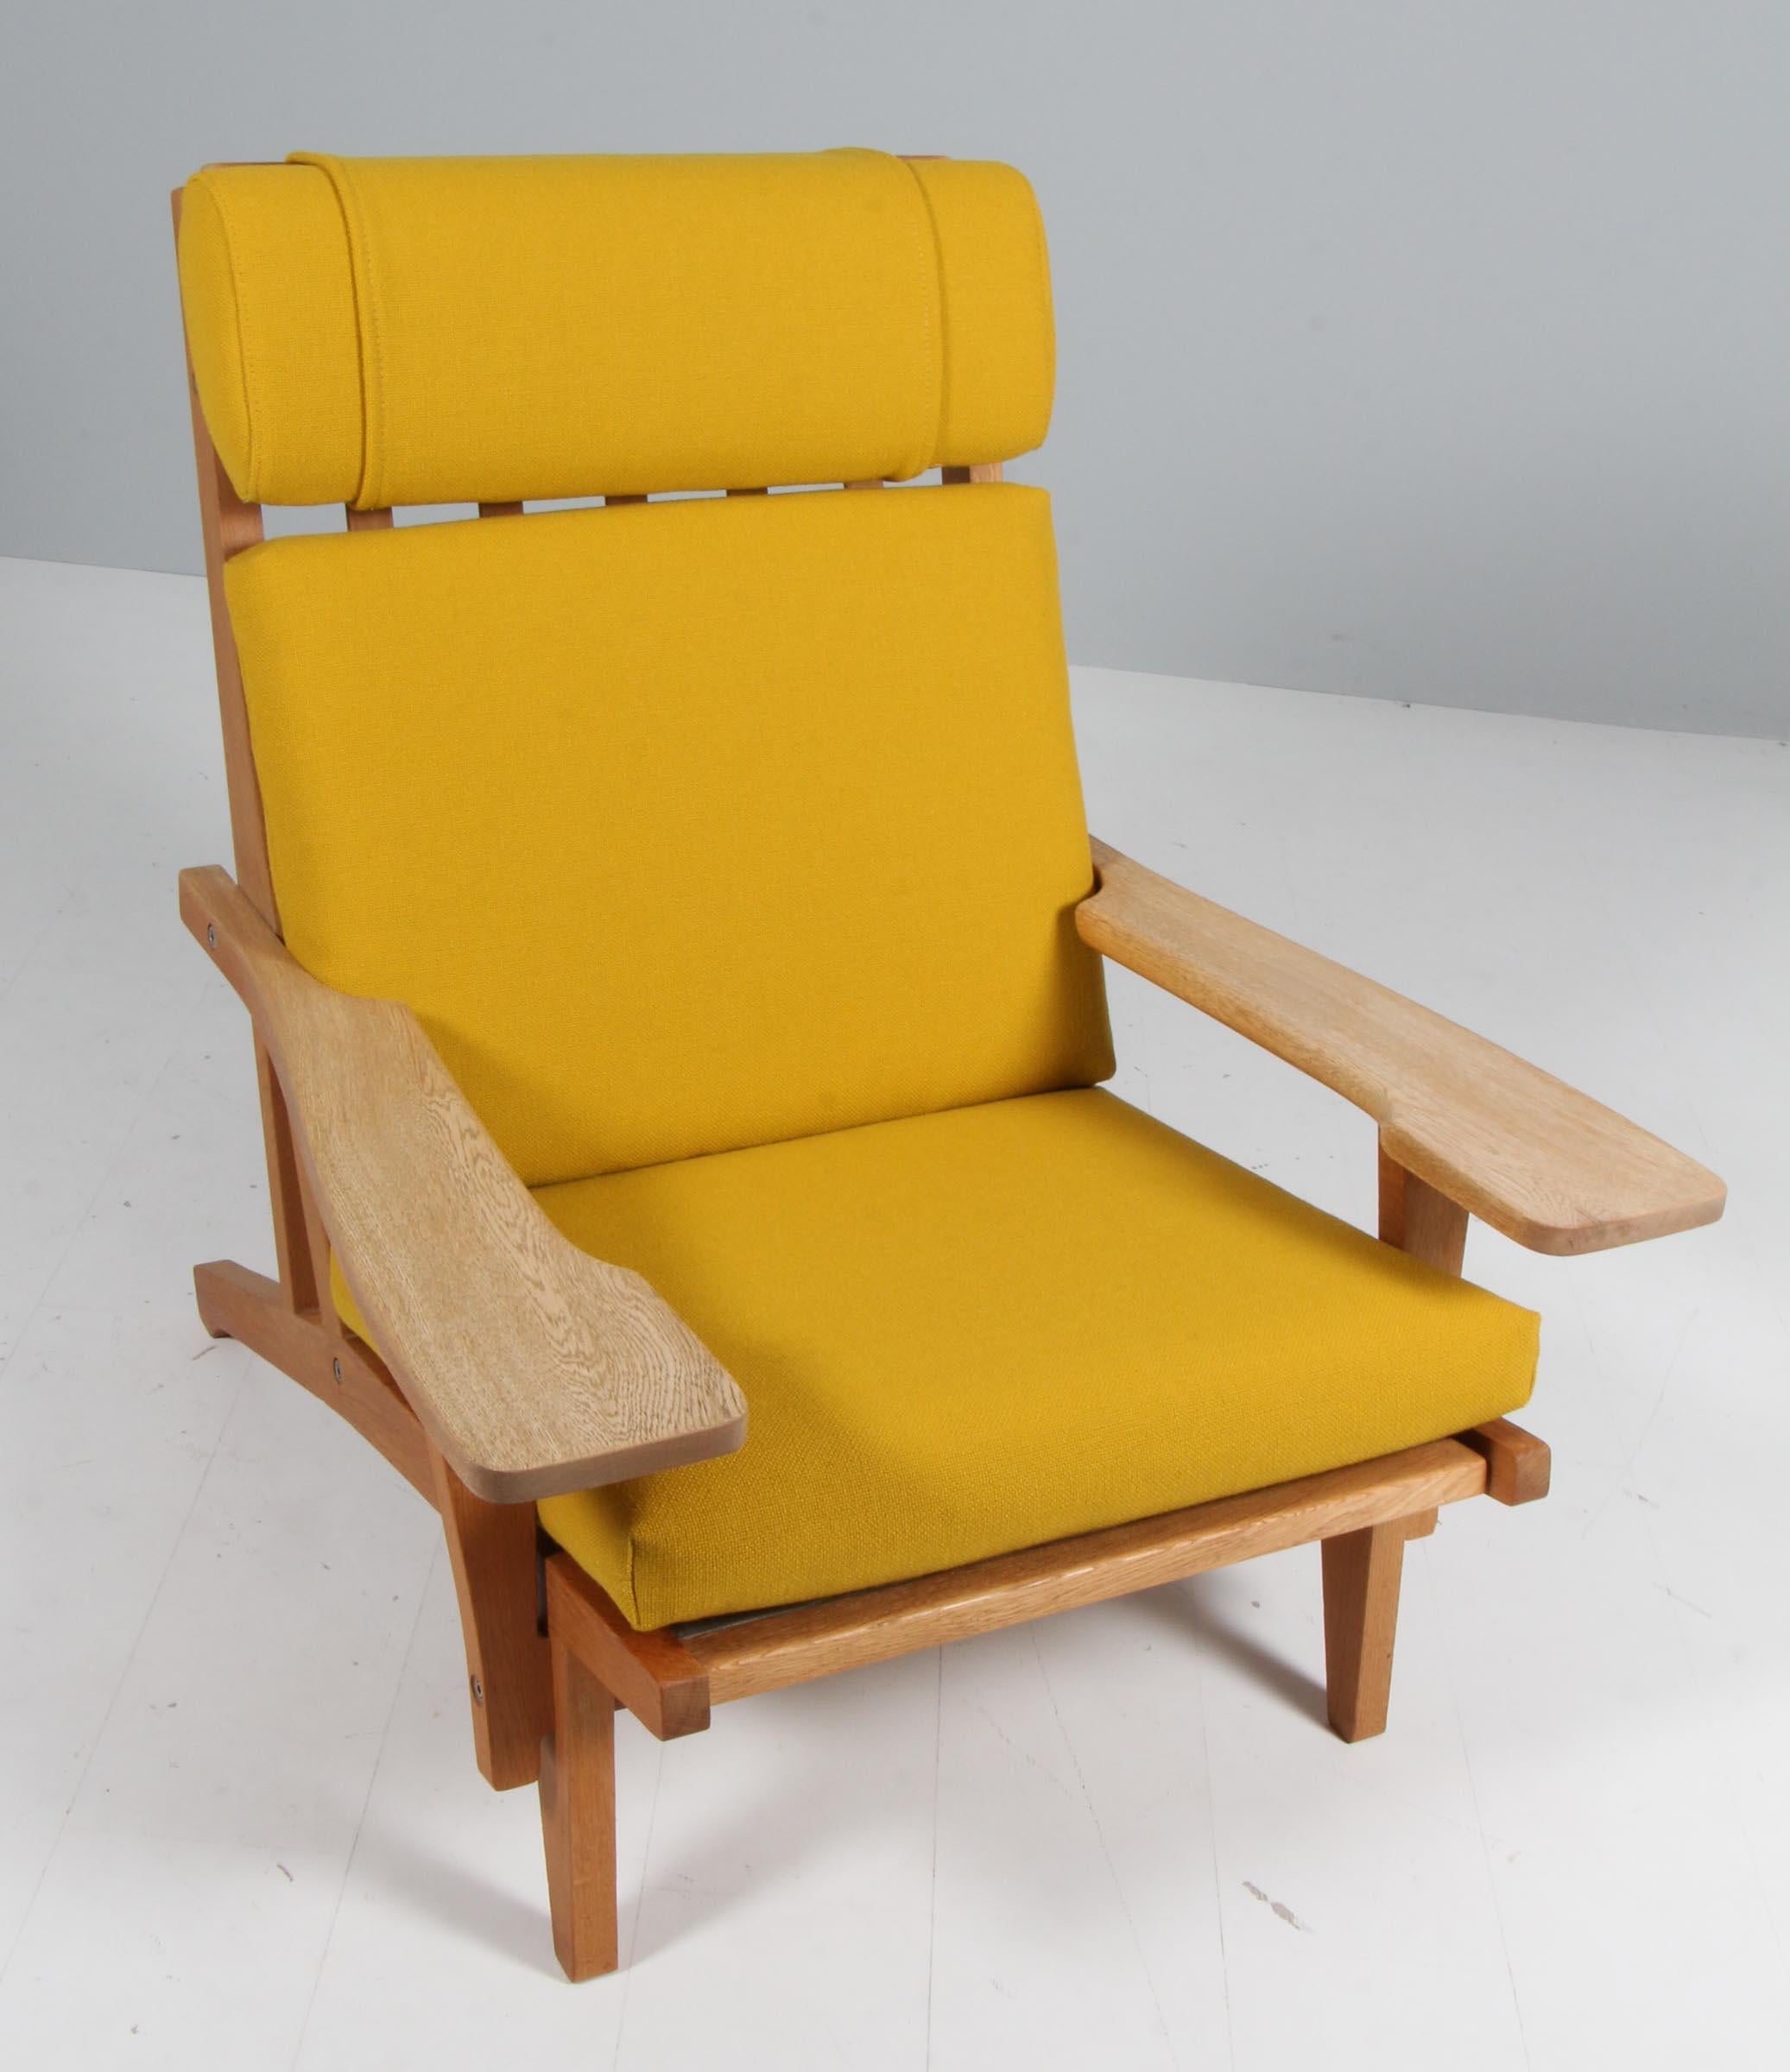 Hans J. Wegner lounge chair with loose cushions new upholstered with yellow Hallingdal wool from Kvadrat.

Frame of oak. With armrests.

Model GE-375, made by GETAMA.